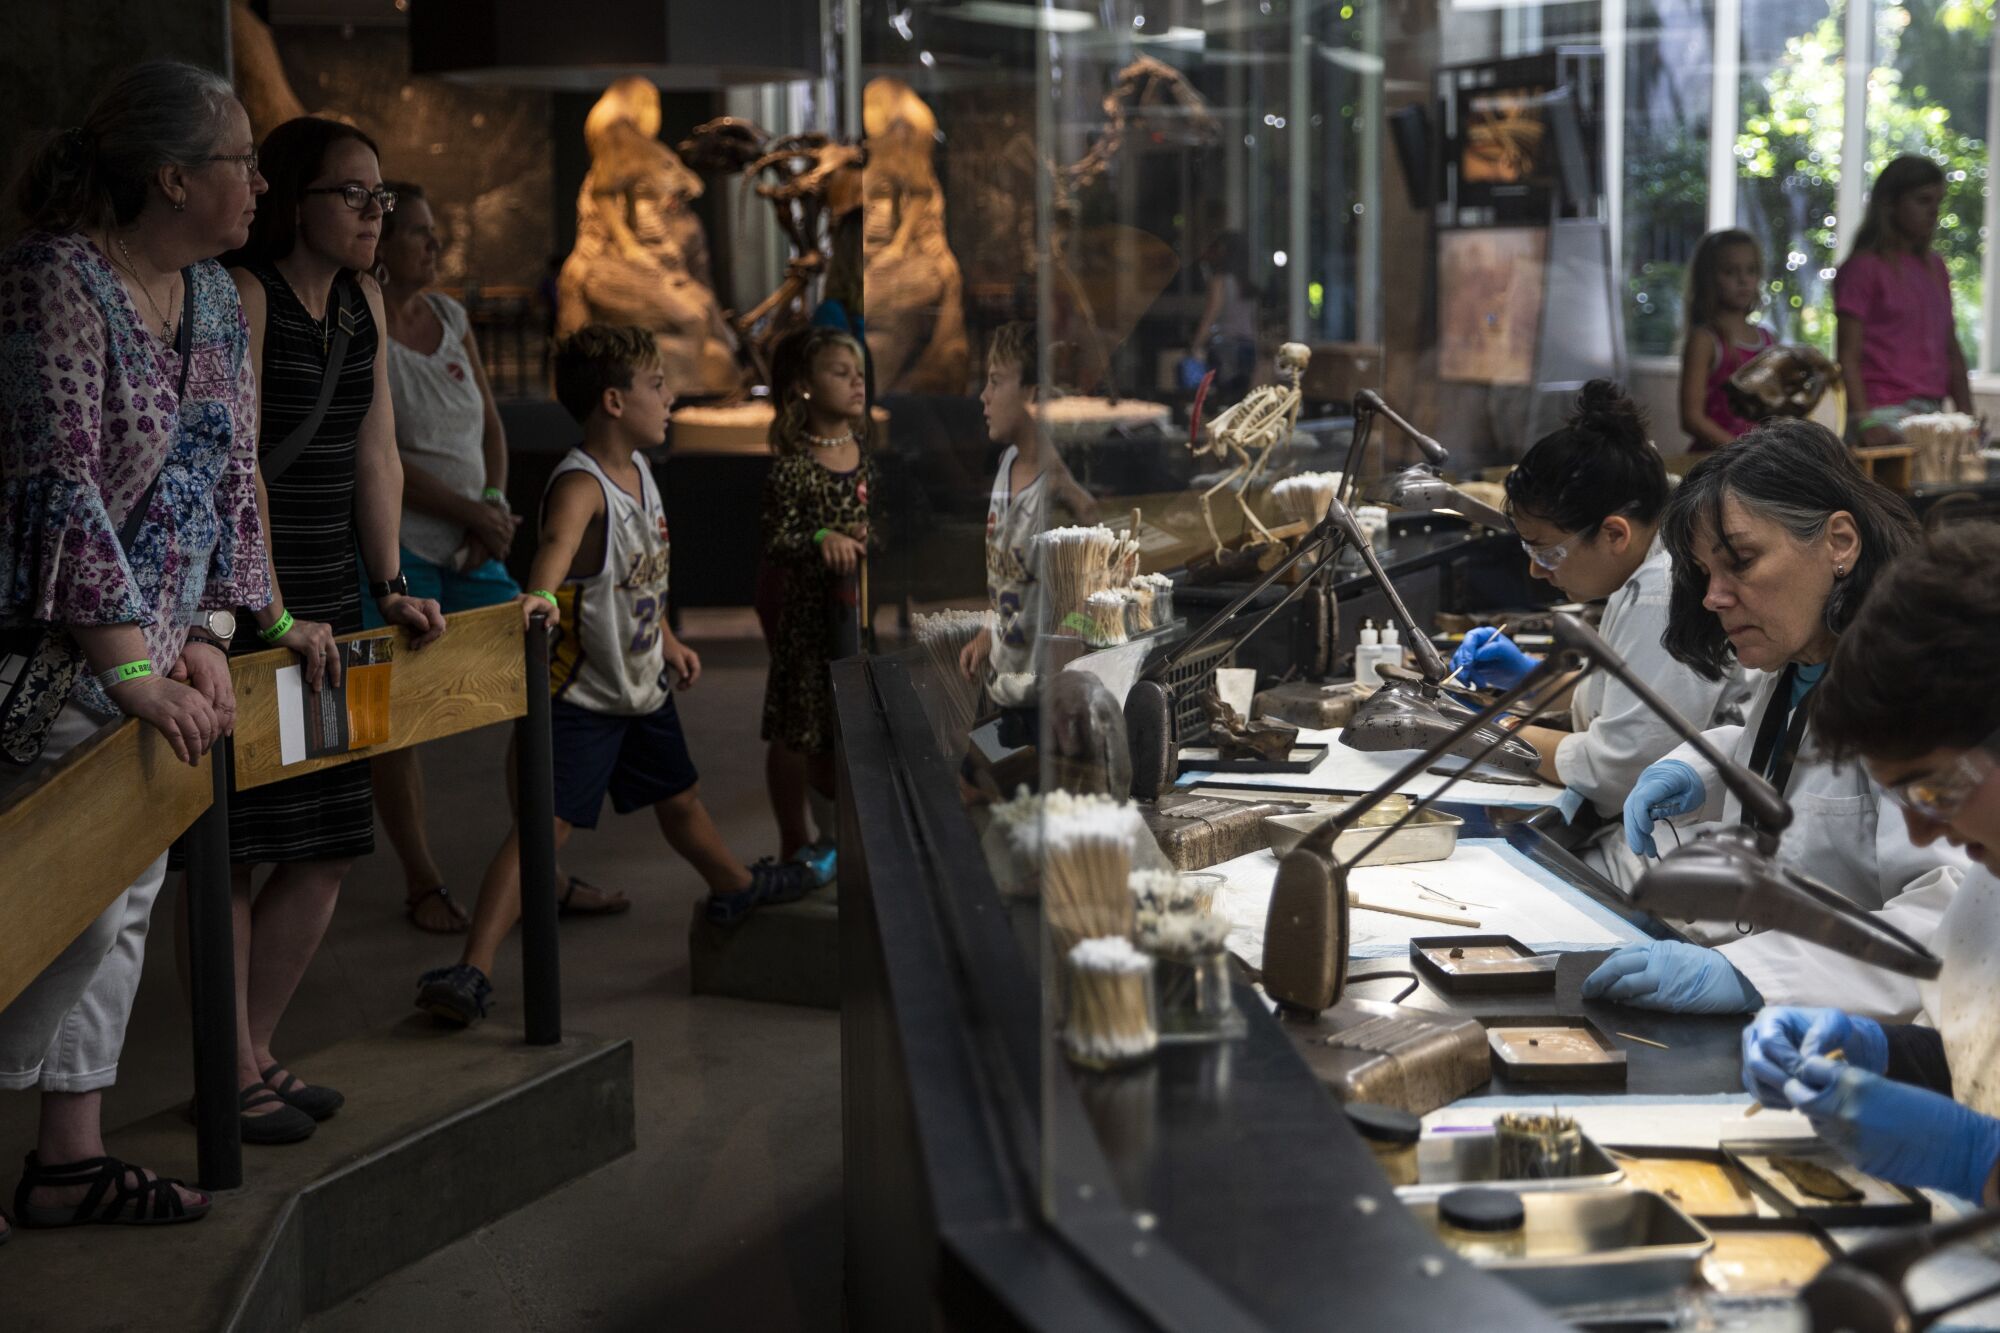 People watch a demonstration at the Fossil Lab at the La Brea Tar Pits and Museum.